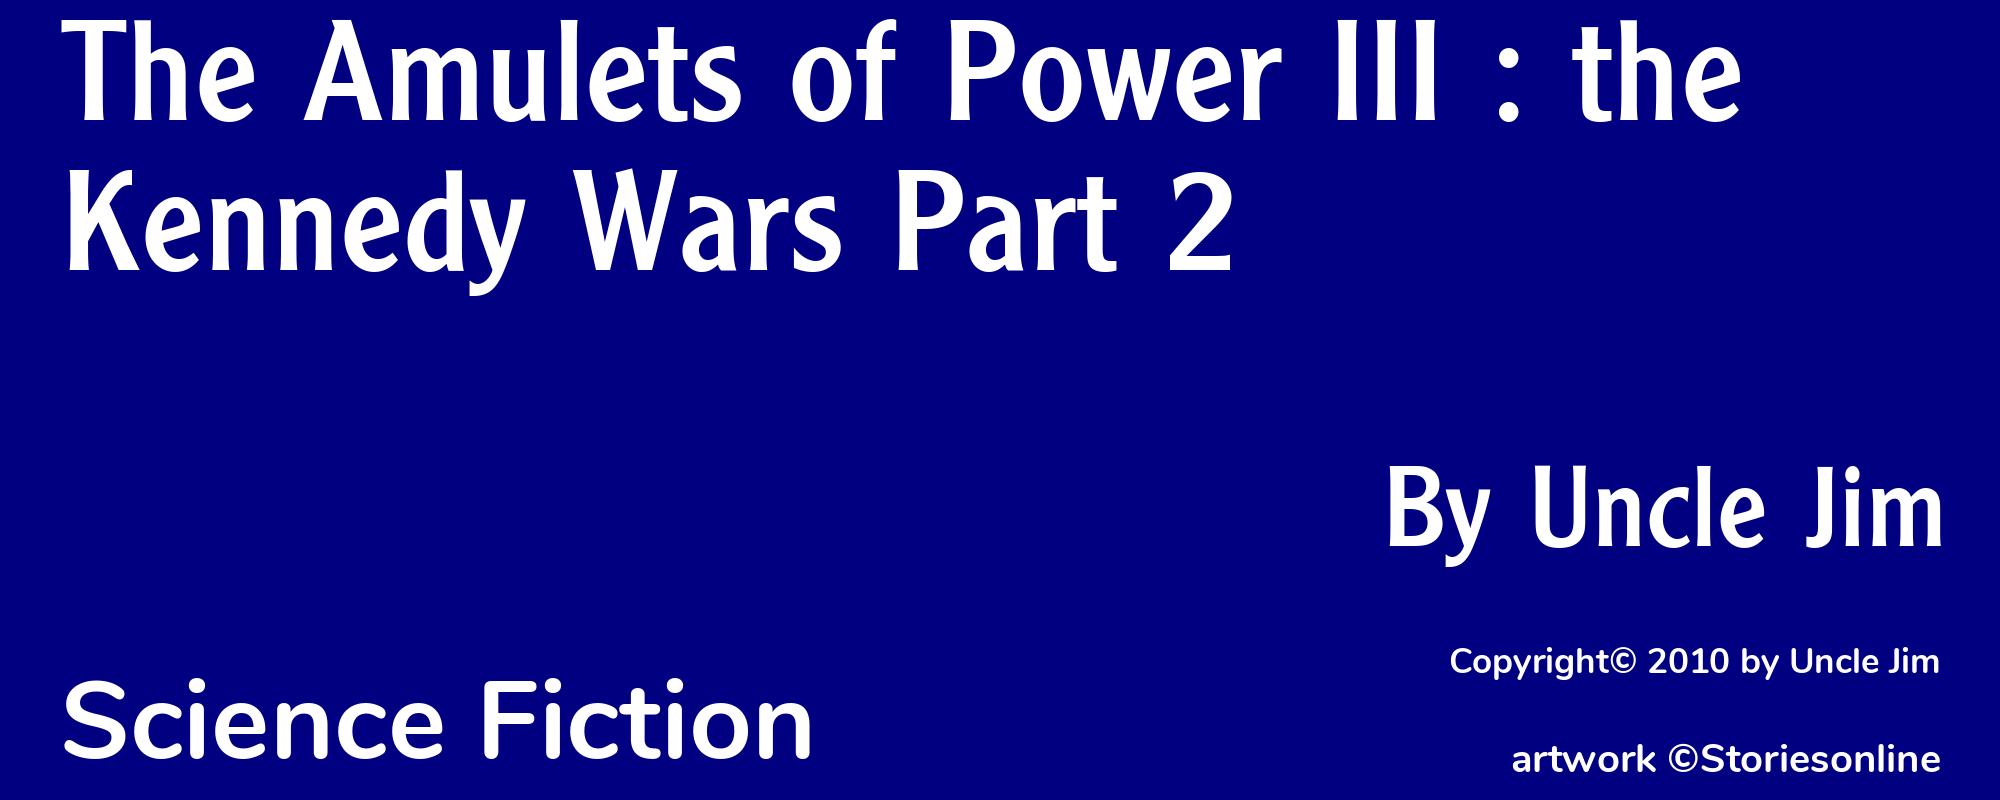 The Amulets of Power III : the Kennedy Wars Part 2 - Cover